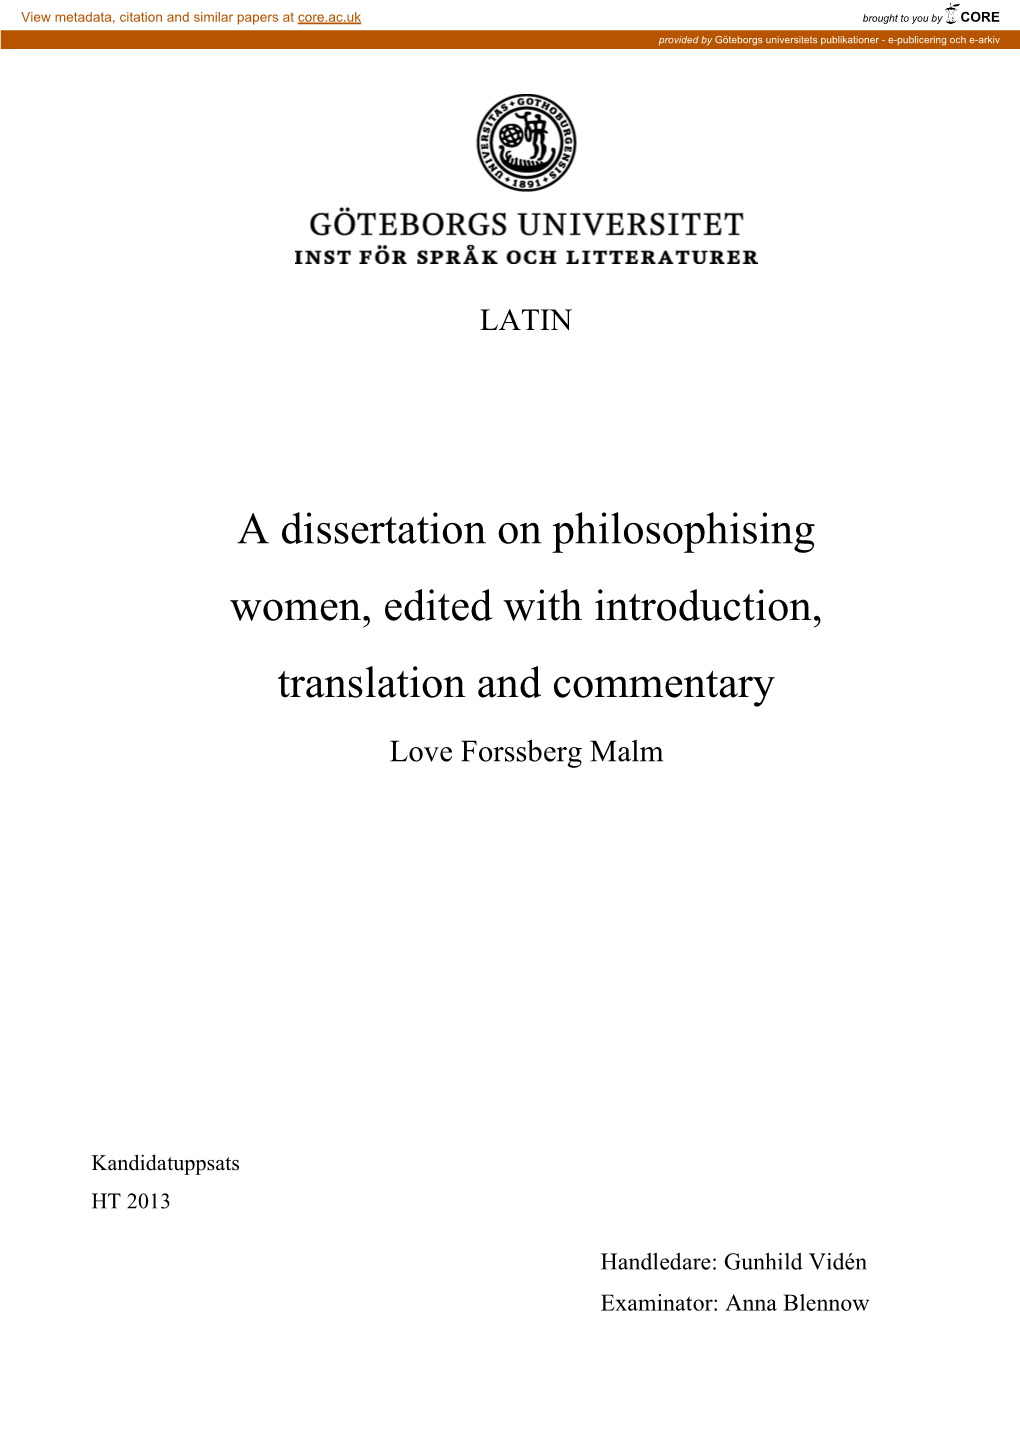 A Dissertation on Philosophising Women, Edited with Introduction, Translation and Commentary Love Forssberg Malm